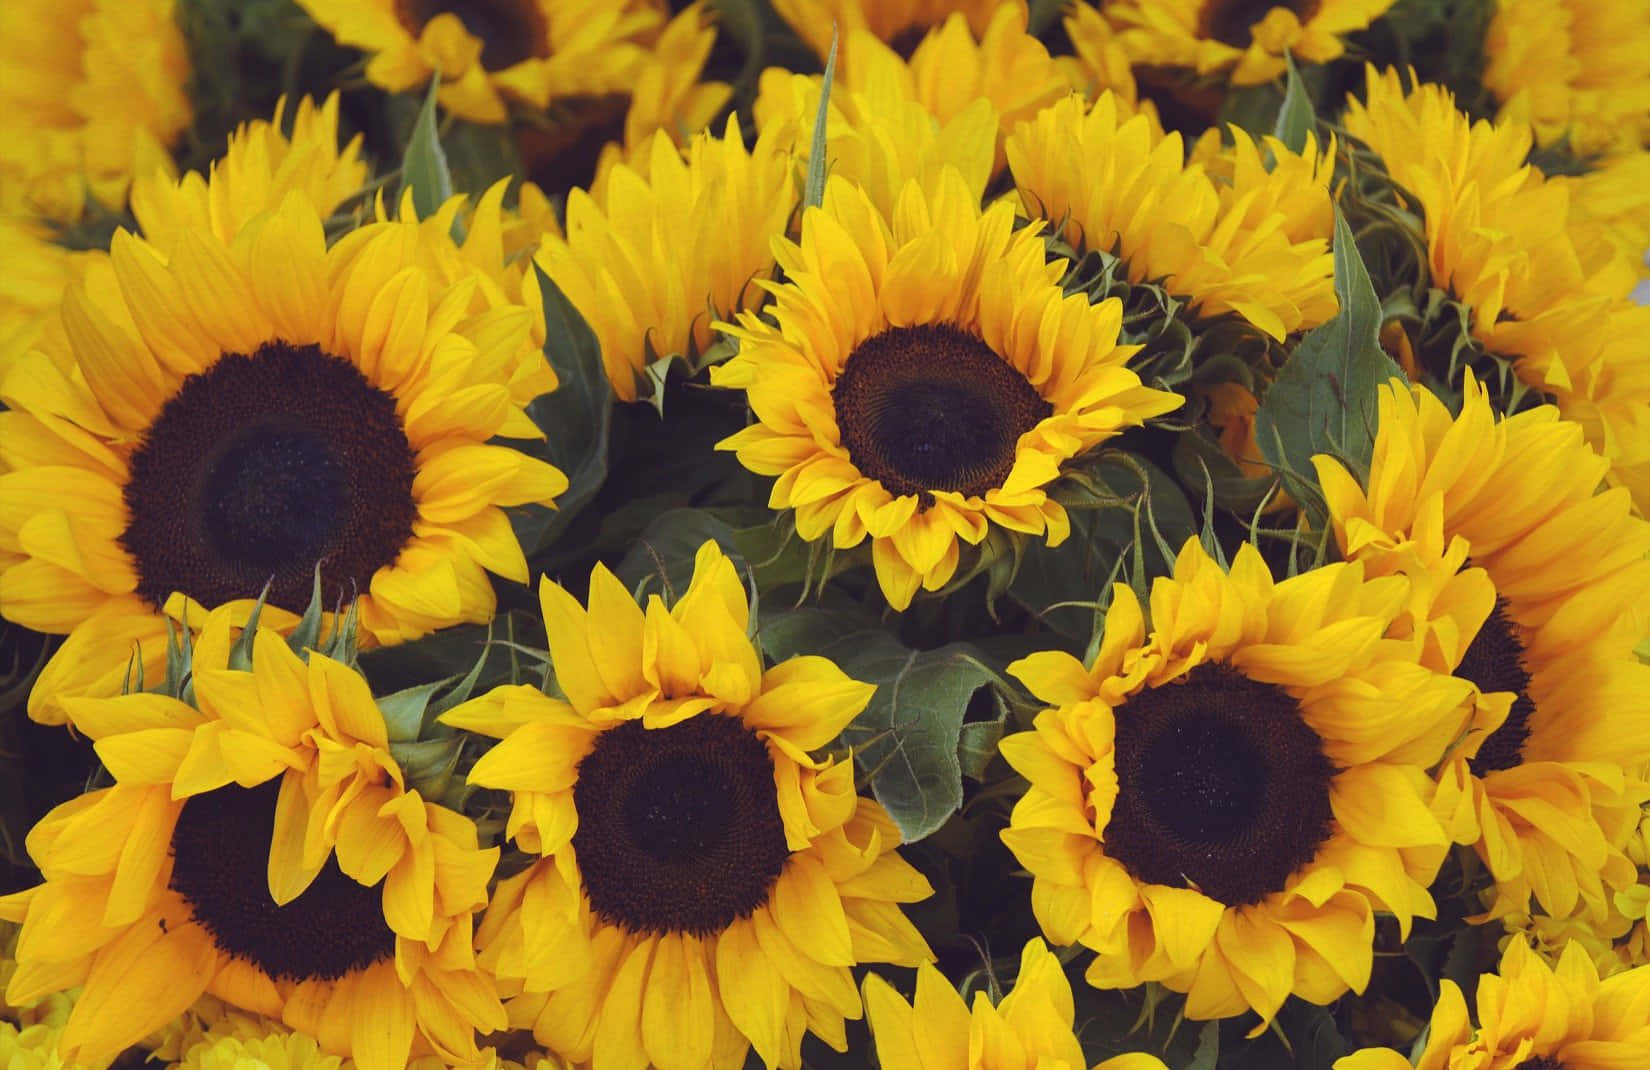 A bright and cheerful yellow sunflower basking in the sunlight Wallpaper